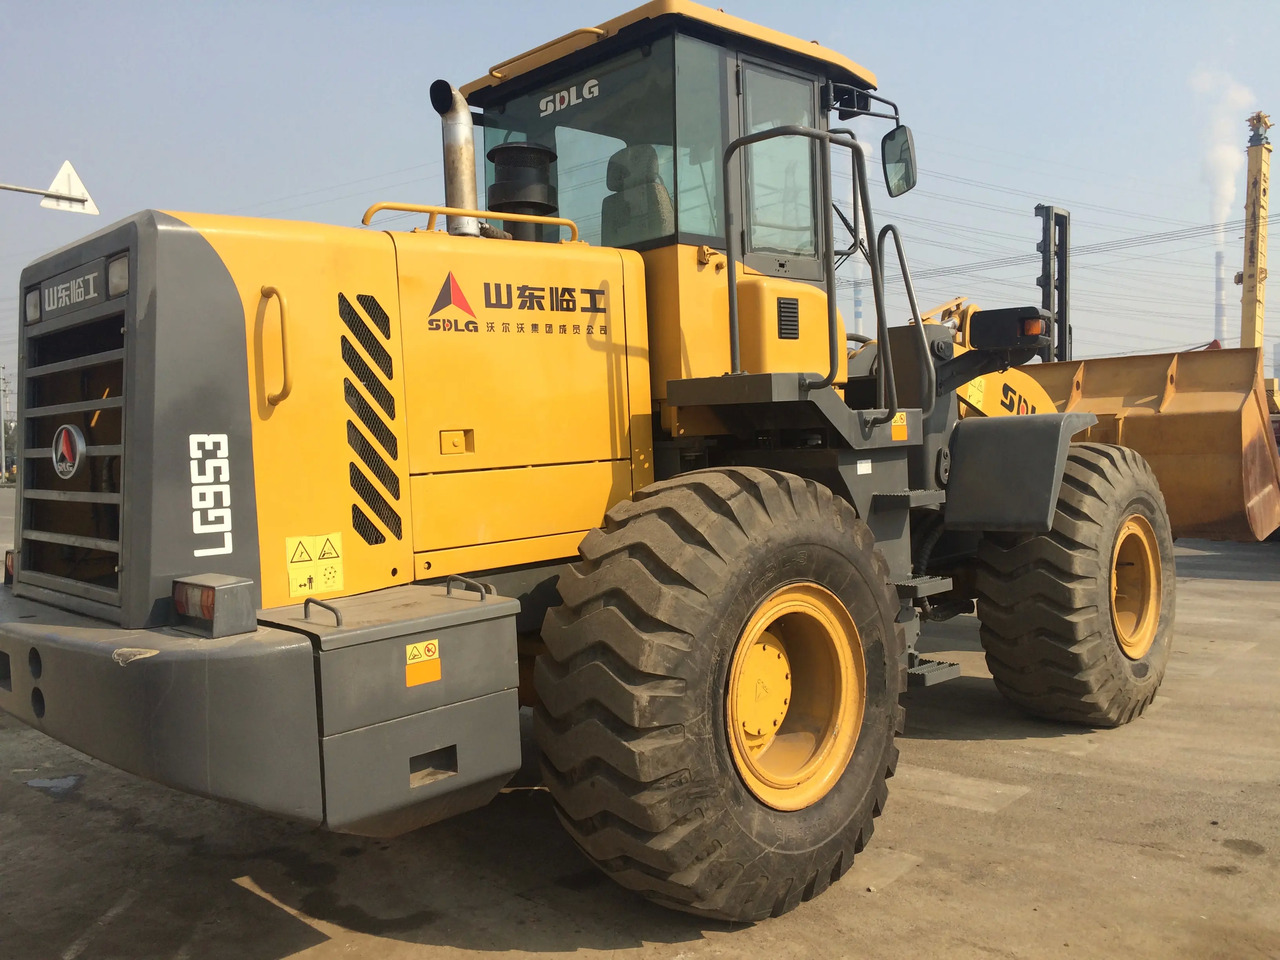 Wiellader 5 ton mini Used Original State loader SDLG 953 Used Small  wheel loader in good condition